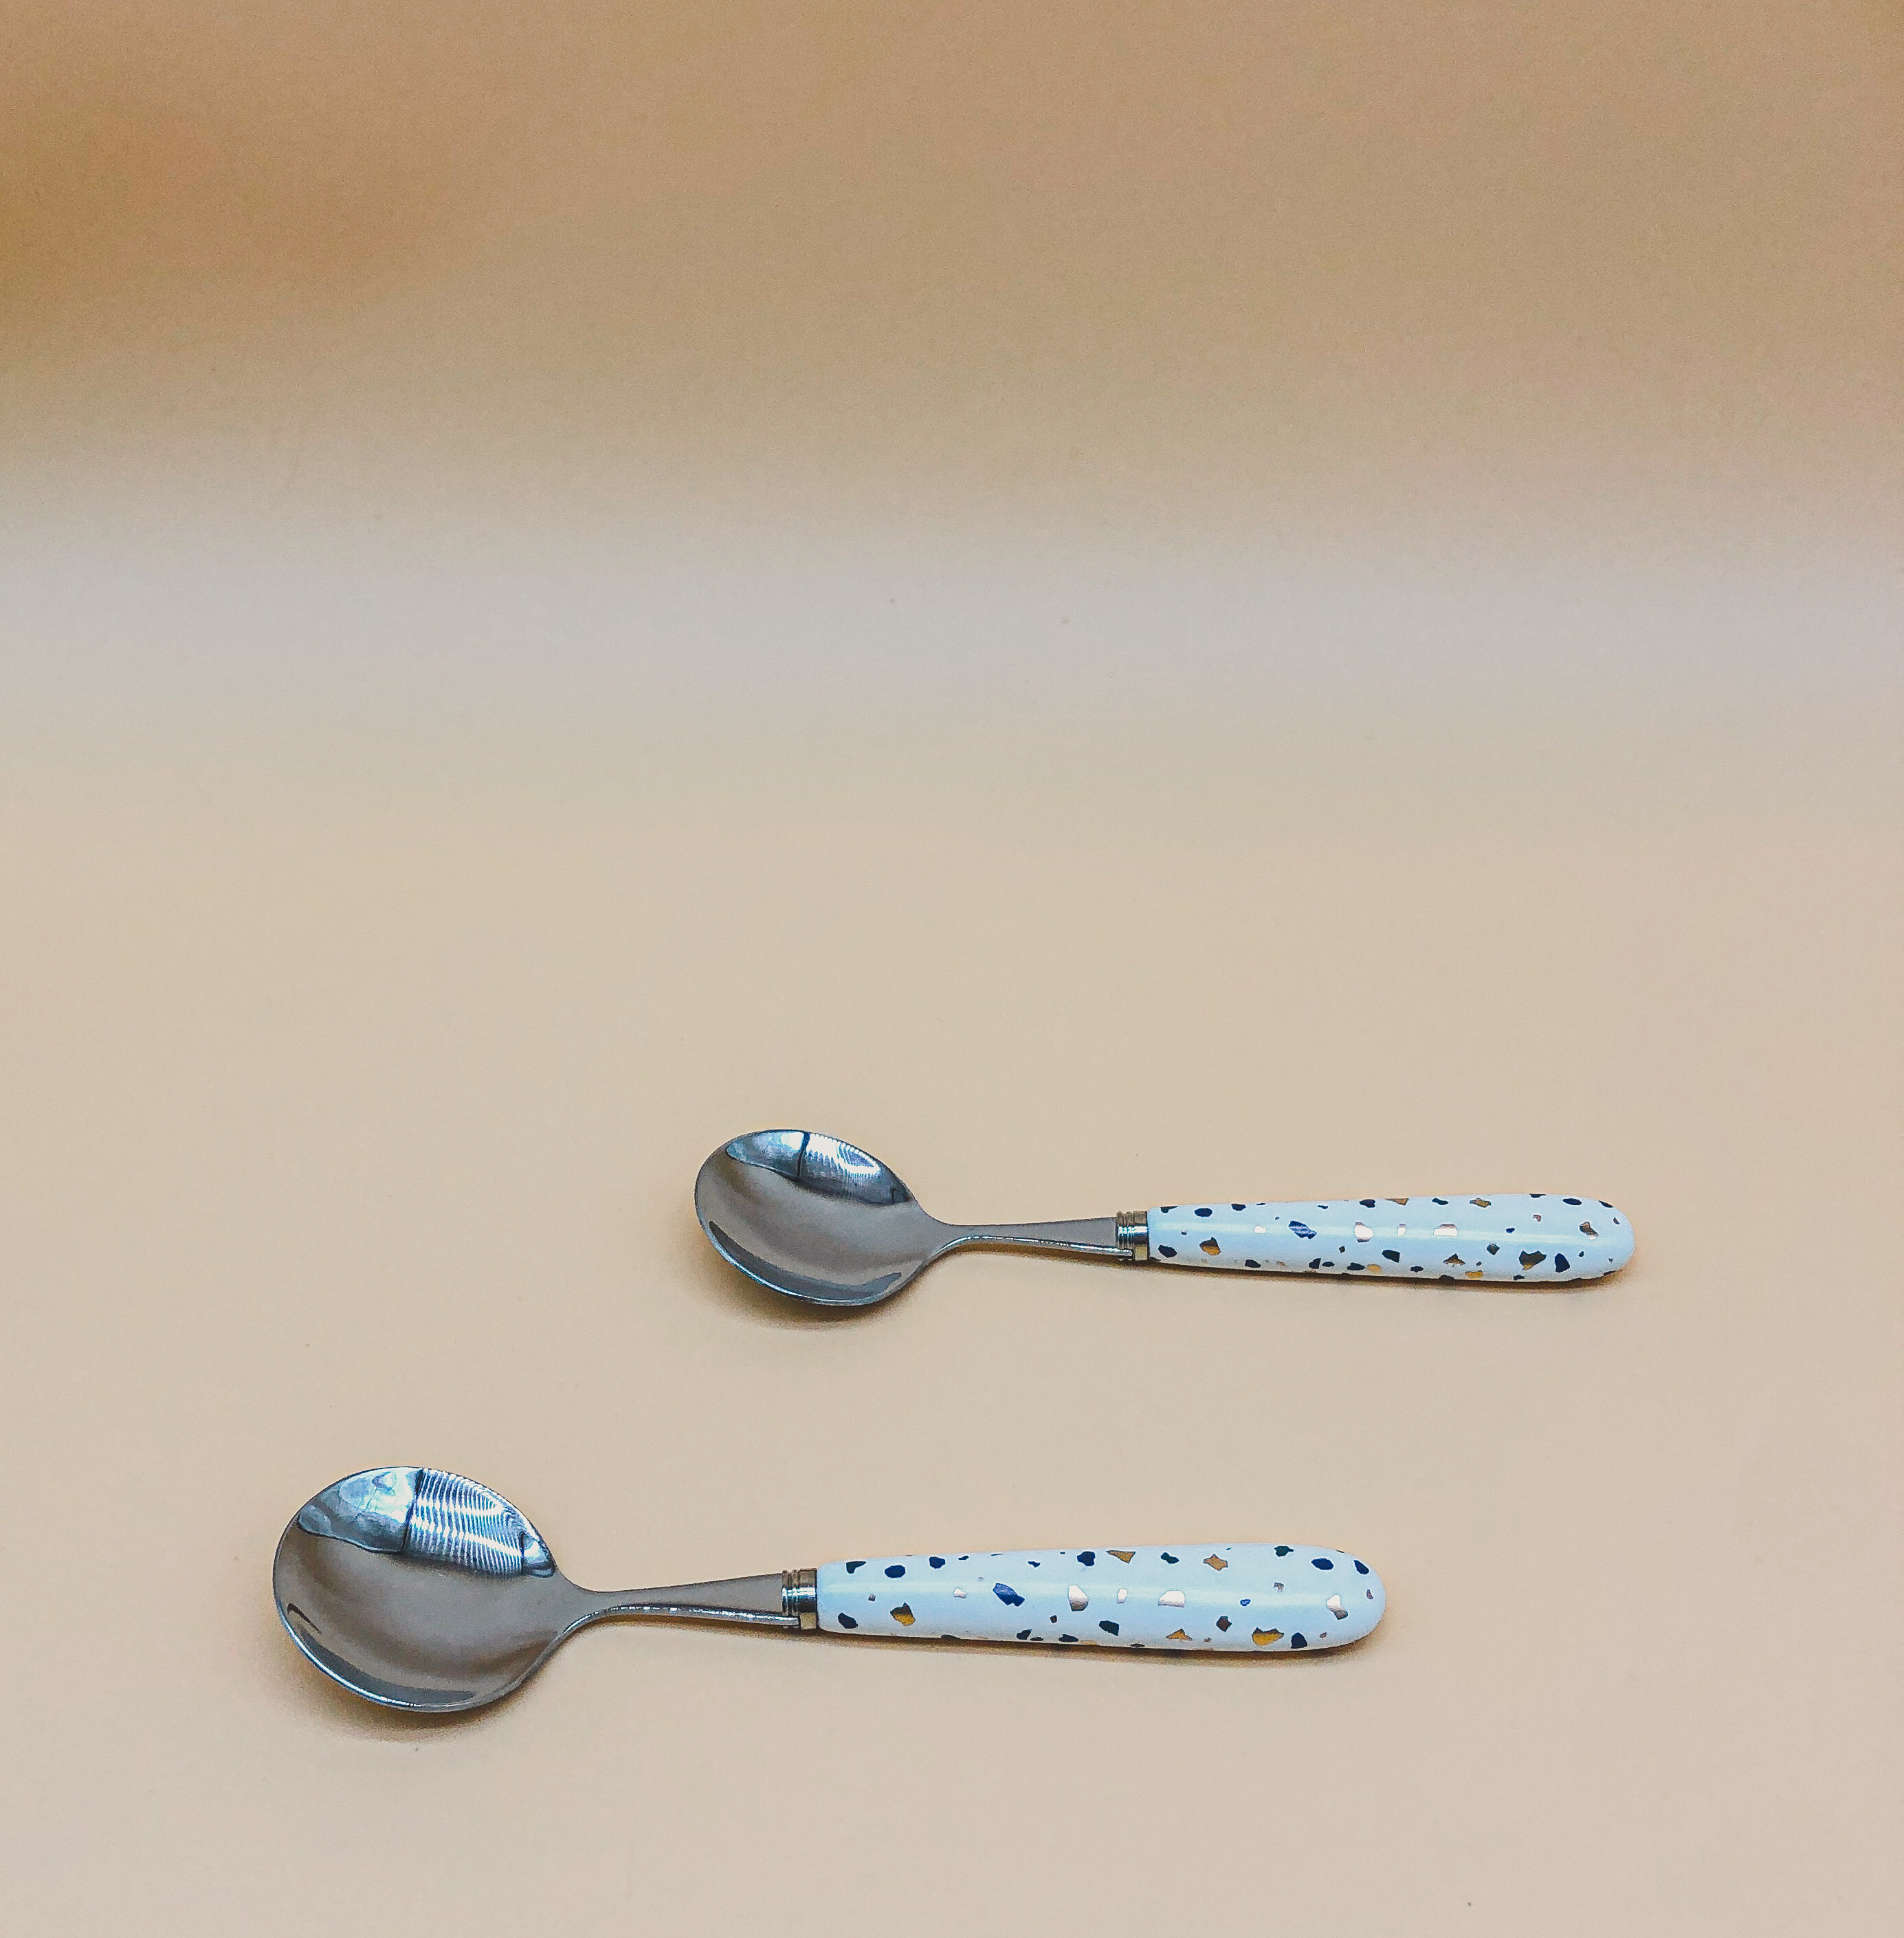 Navy Speckled Spoon by PROSE Tabletop